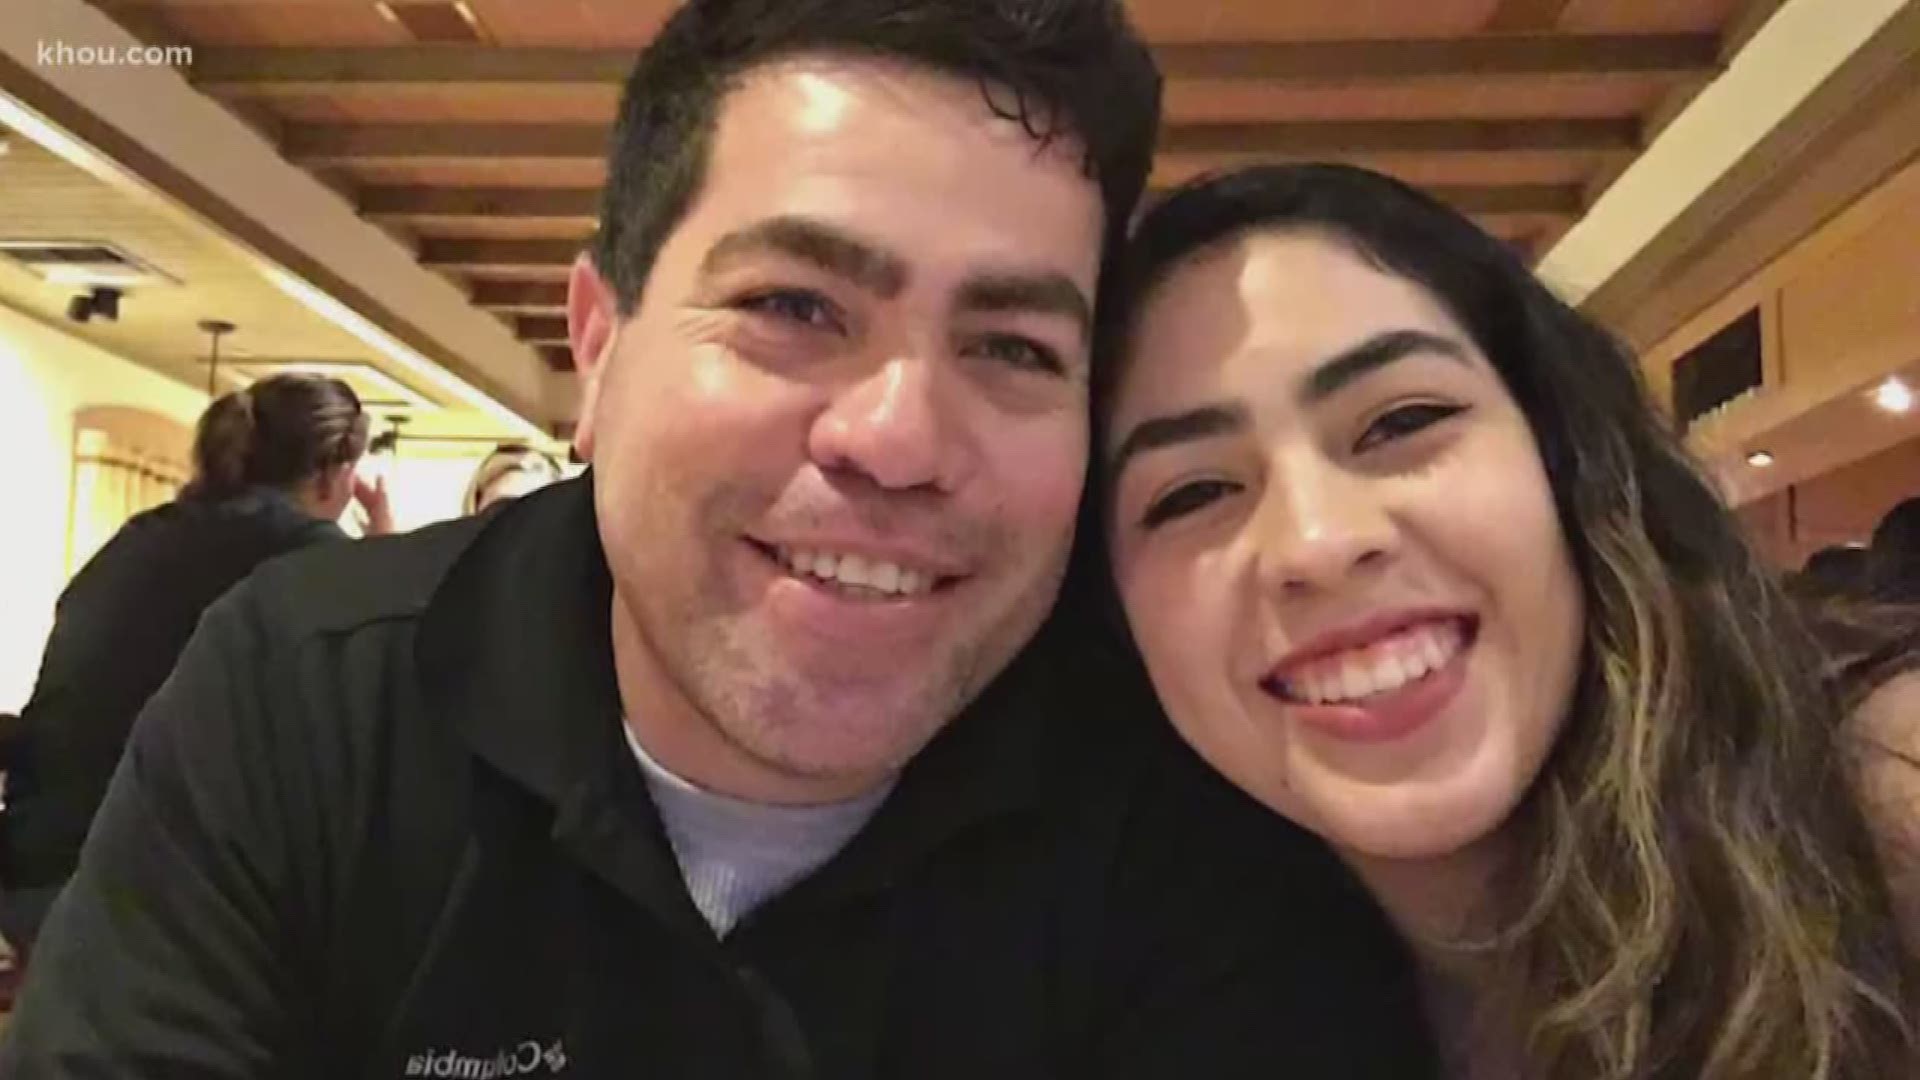 A Houston daughter is devastated after her father was shot and killed, seconds after snapping a photo of the suspected killers.